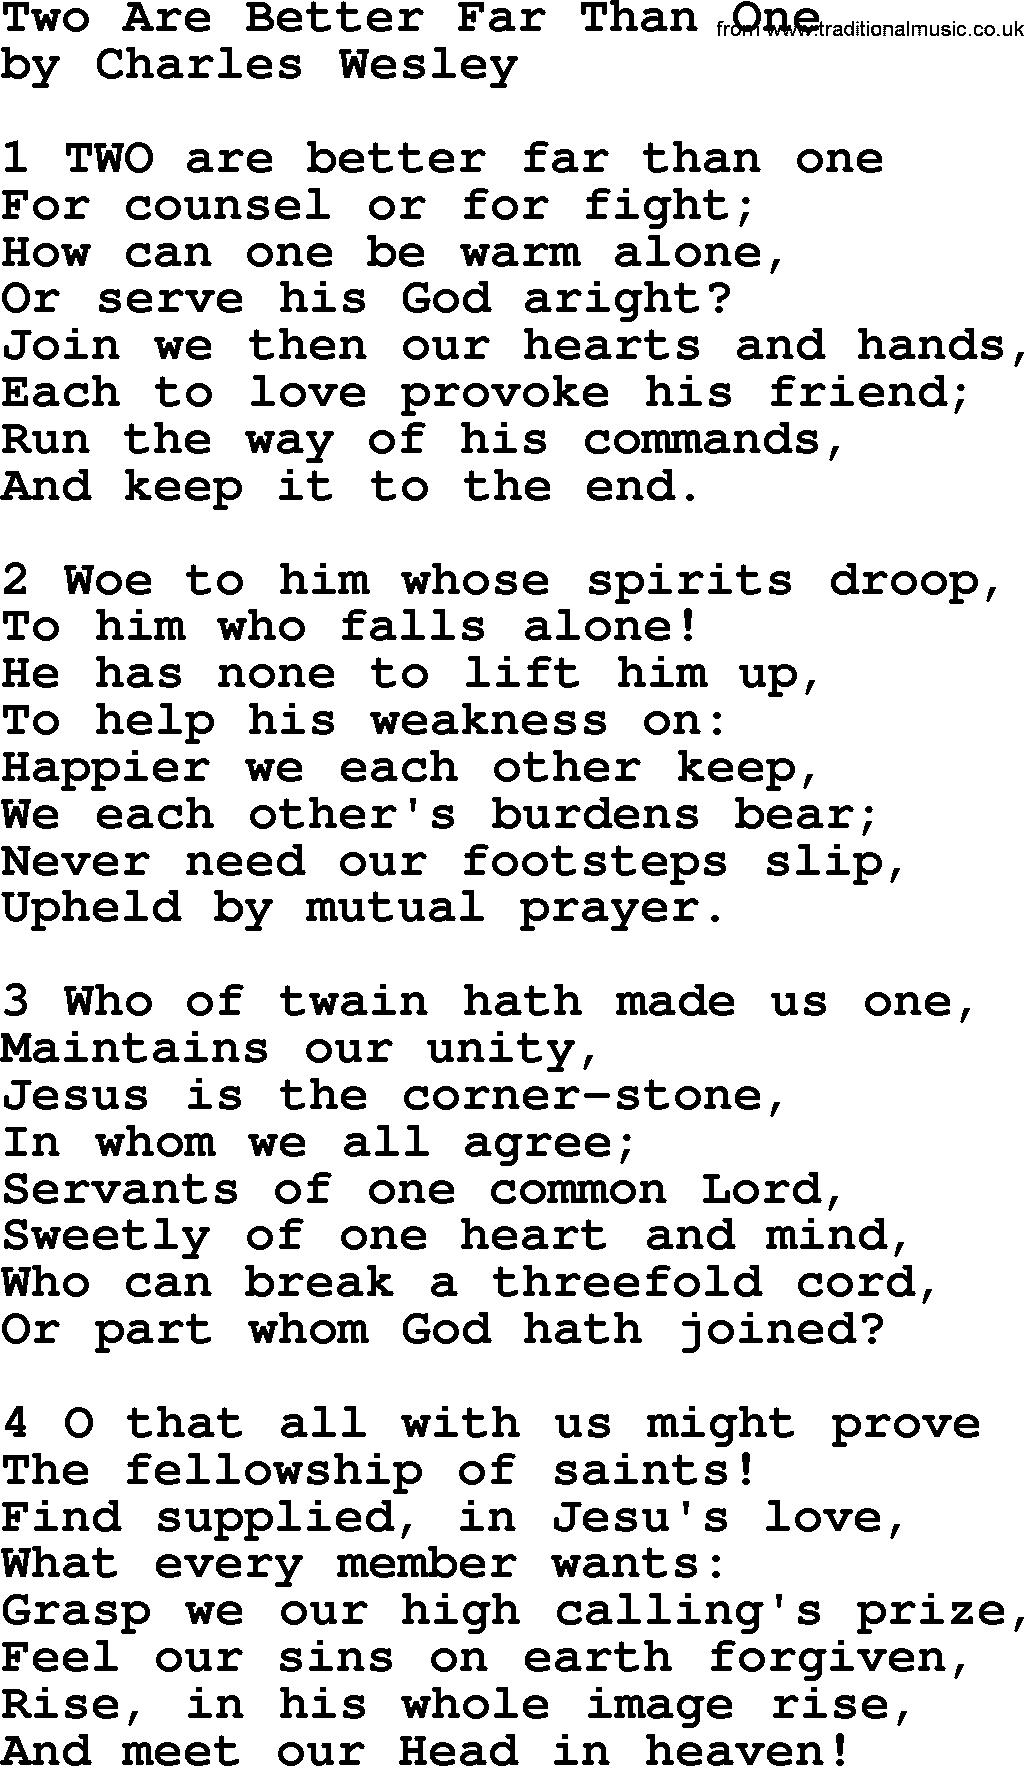 Charles Wesley hymn: Two Are Better Far Than One, lyrics